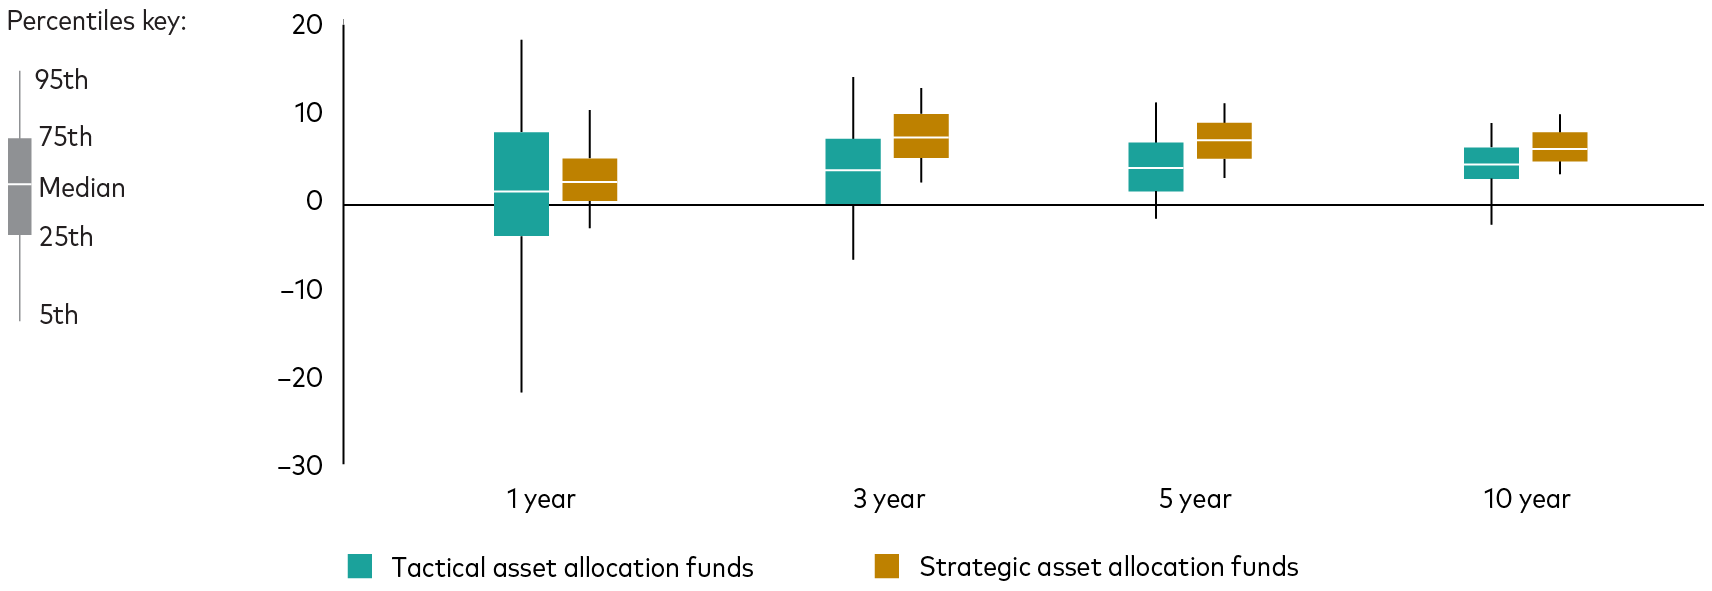 The dispersion of returns of flexible allocation funds versus target allocation funds over 1, 3, 5, and 10 years. Over all four periods, the flexible asset allocation funds had a lower median return and greater dispersion of returns (essentially, more risk) compared with their target allocation peers.